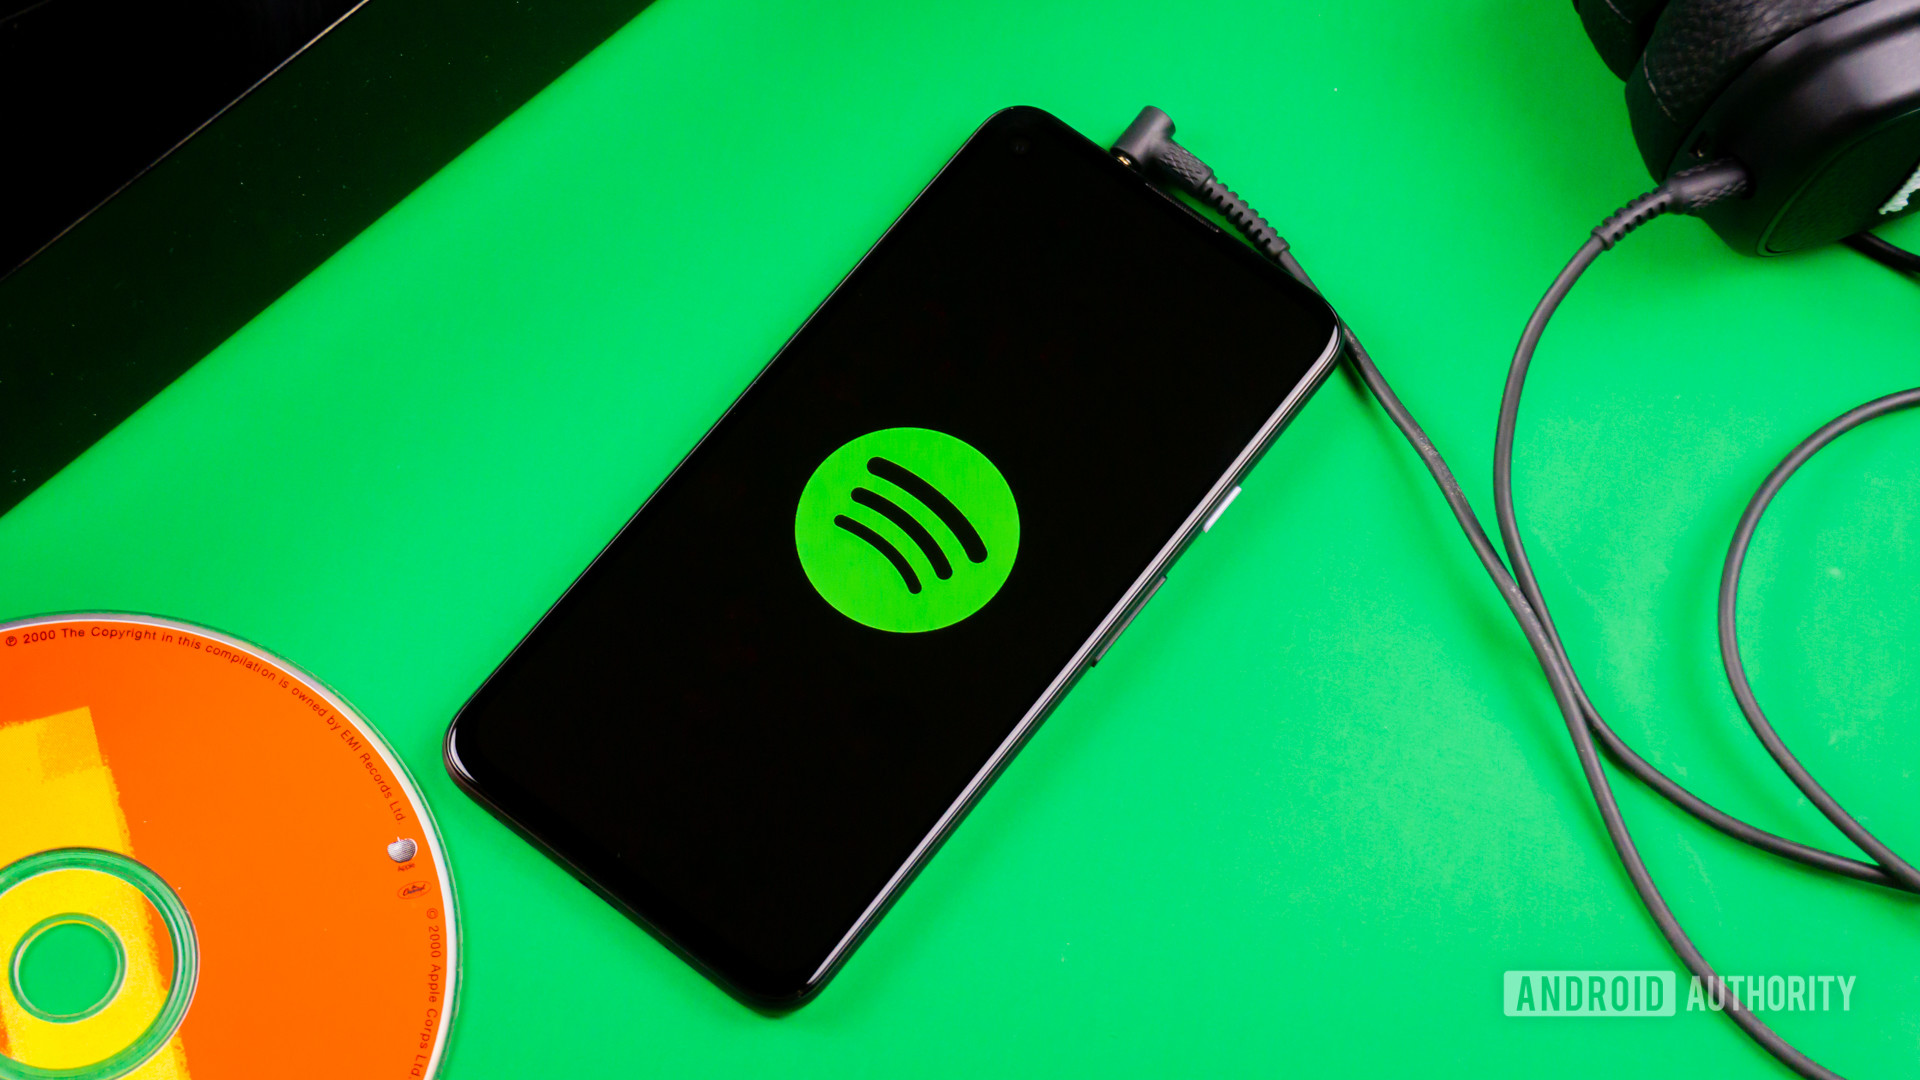 Spotify on mobile